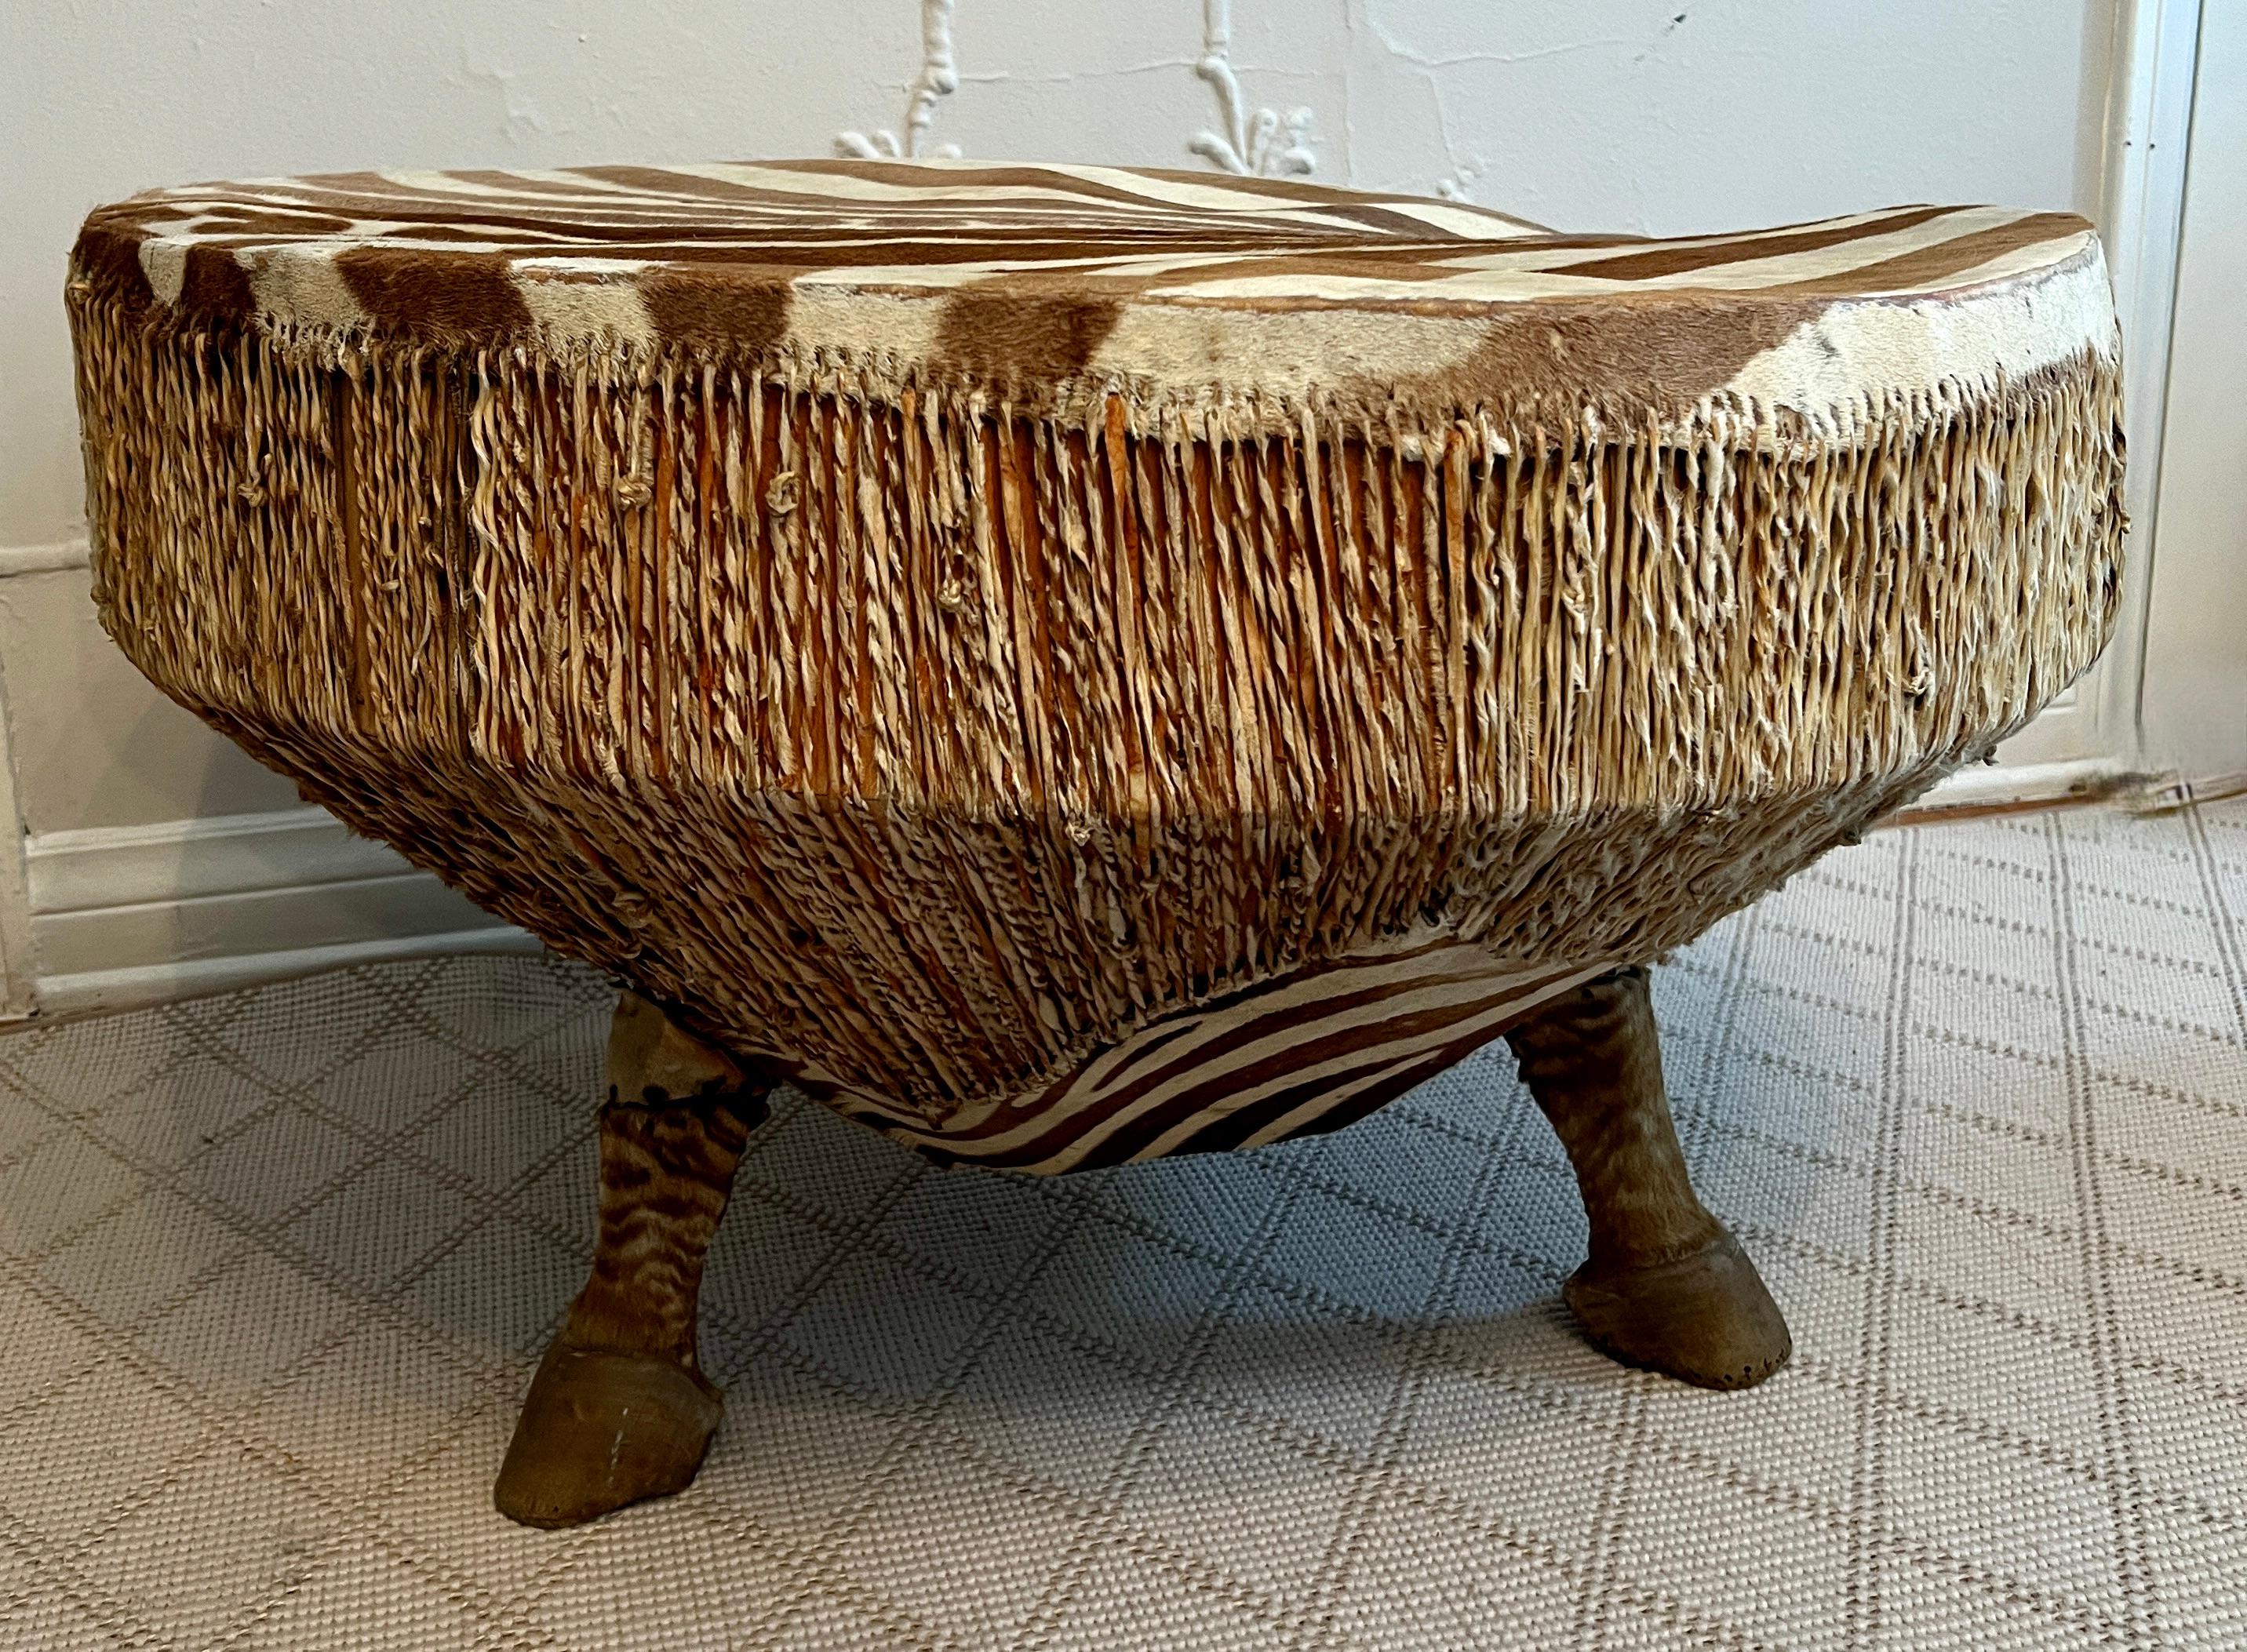 Rustic African Zebra Drum Table with Three Zebra Legs from Ghana For Sale